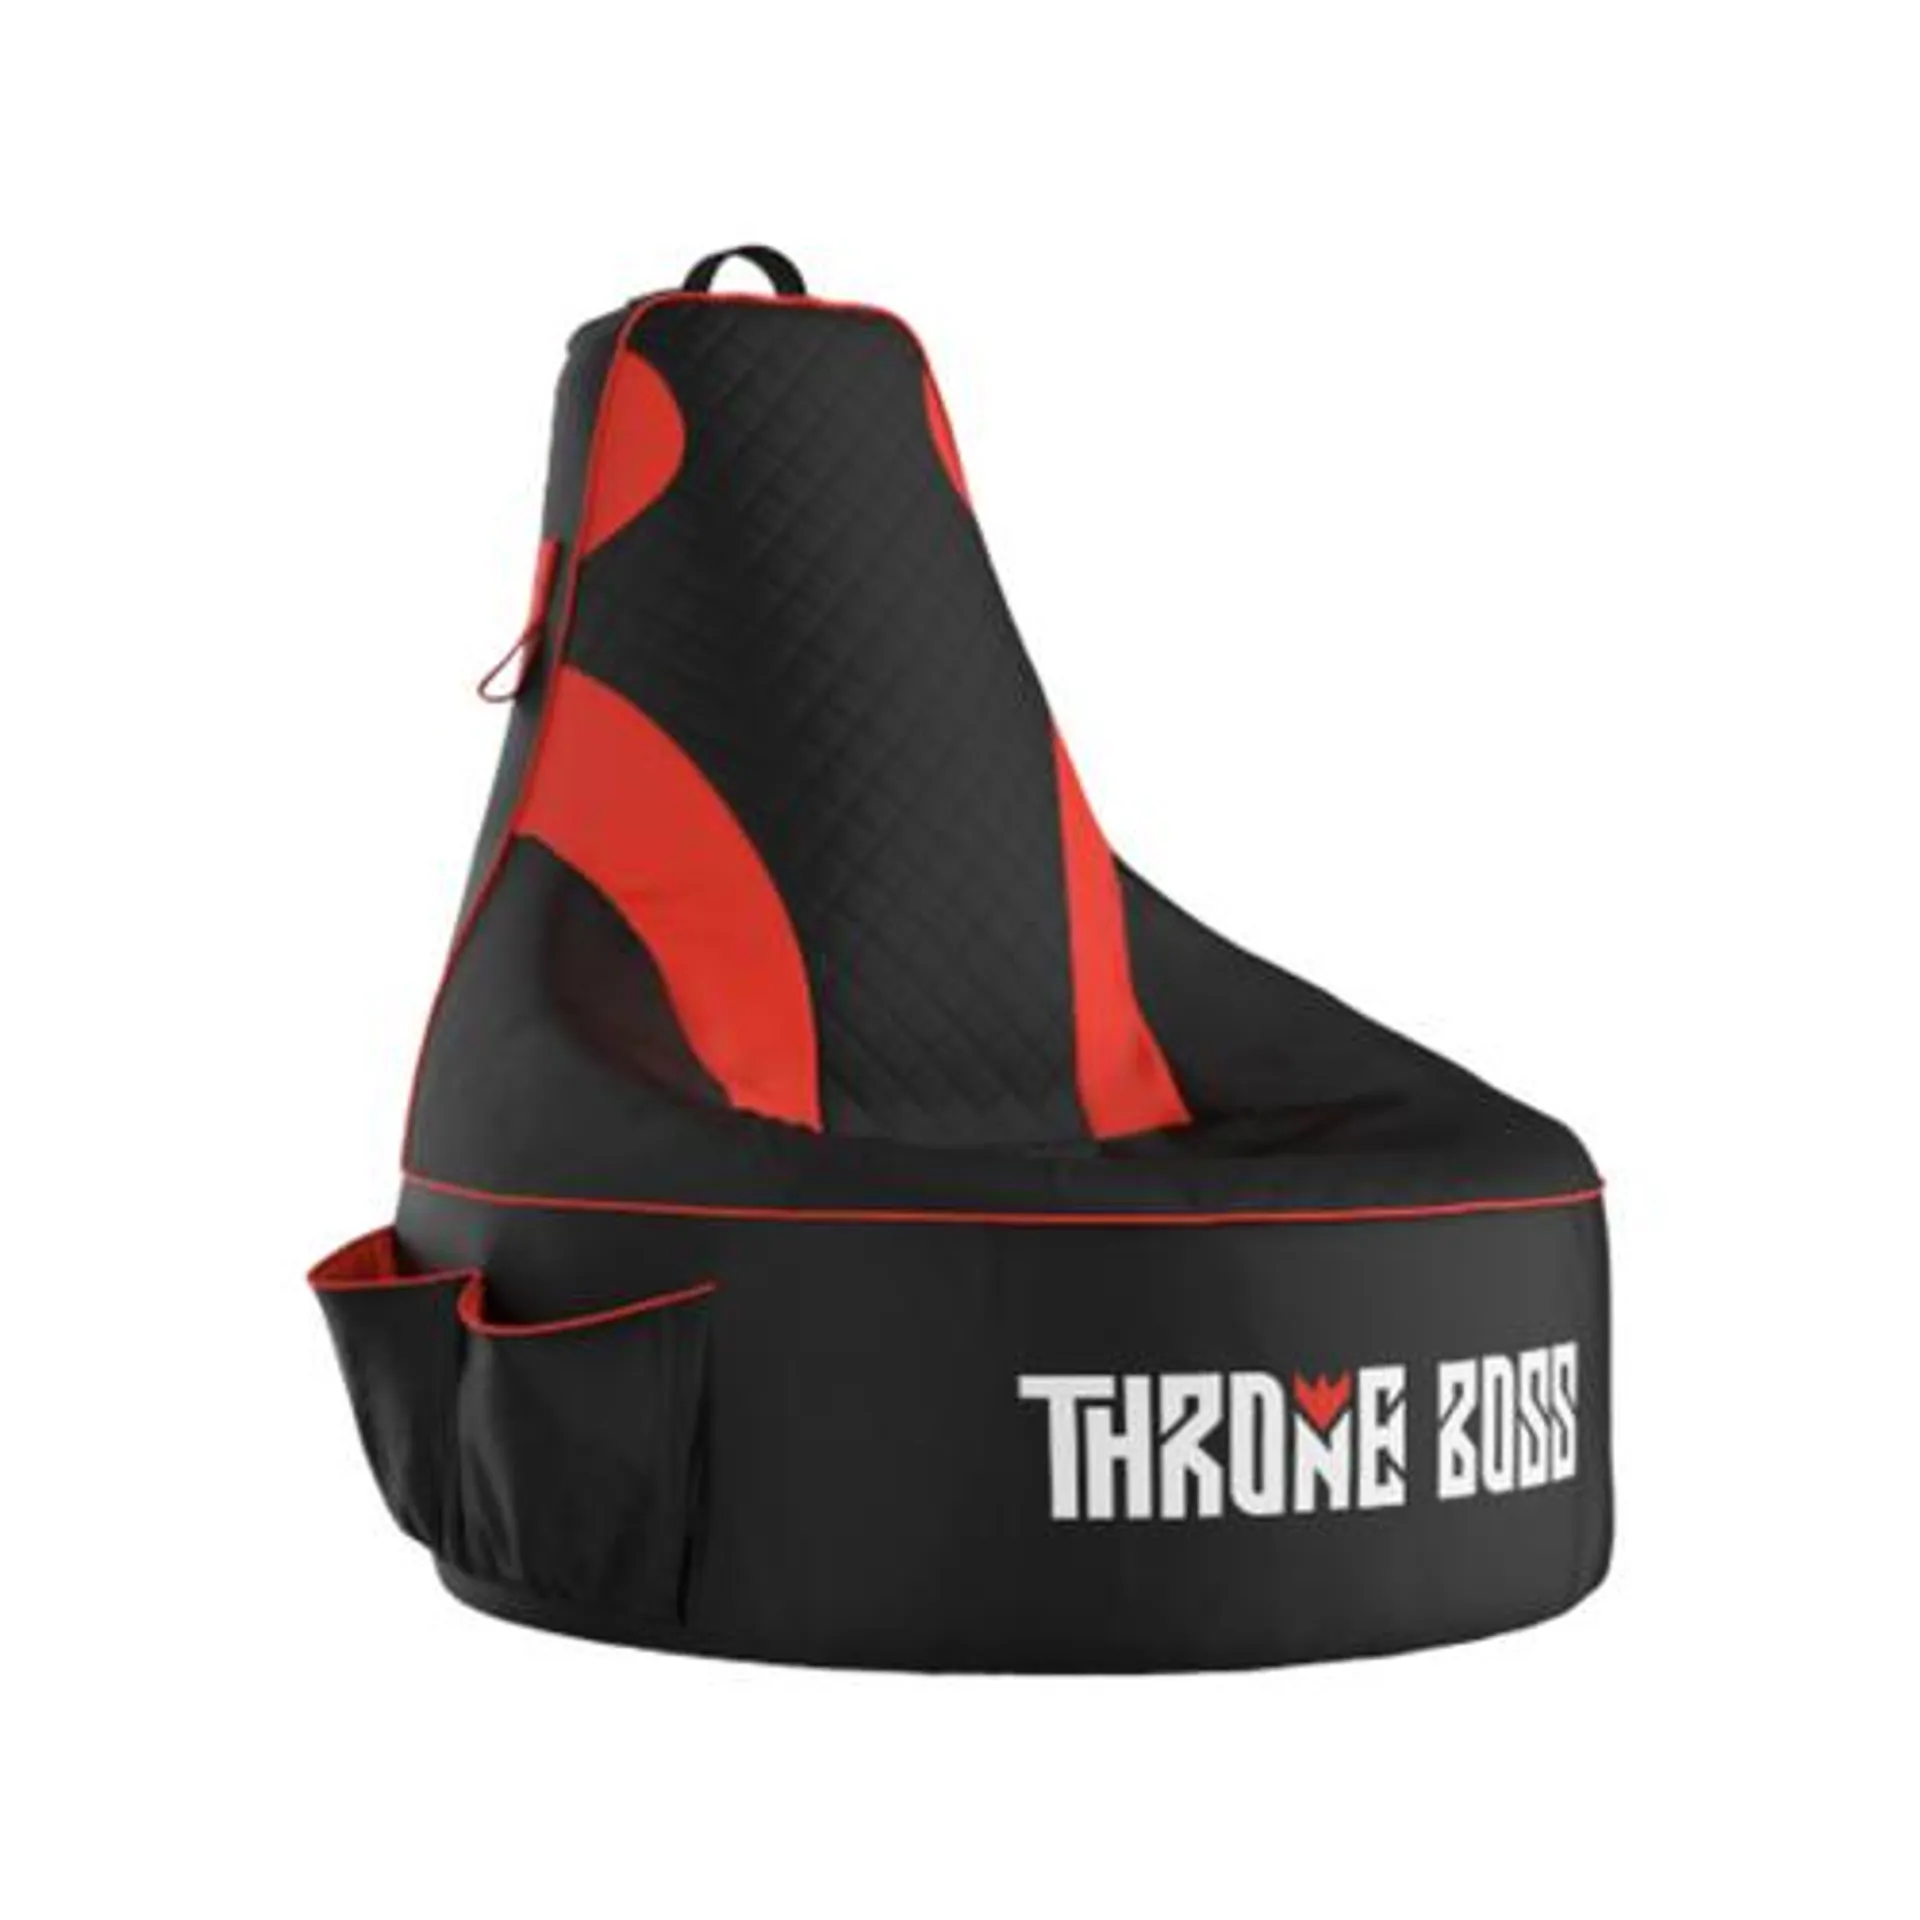 Throne Boss Child Red Gaming Bean Bag Chair